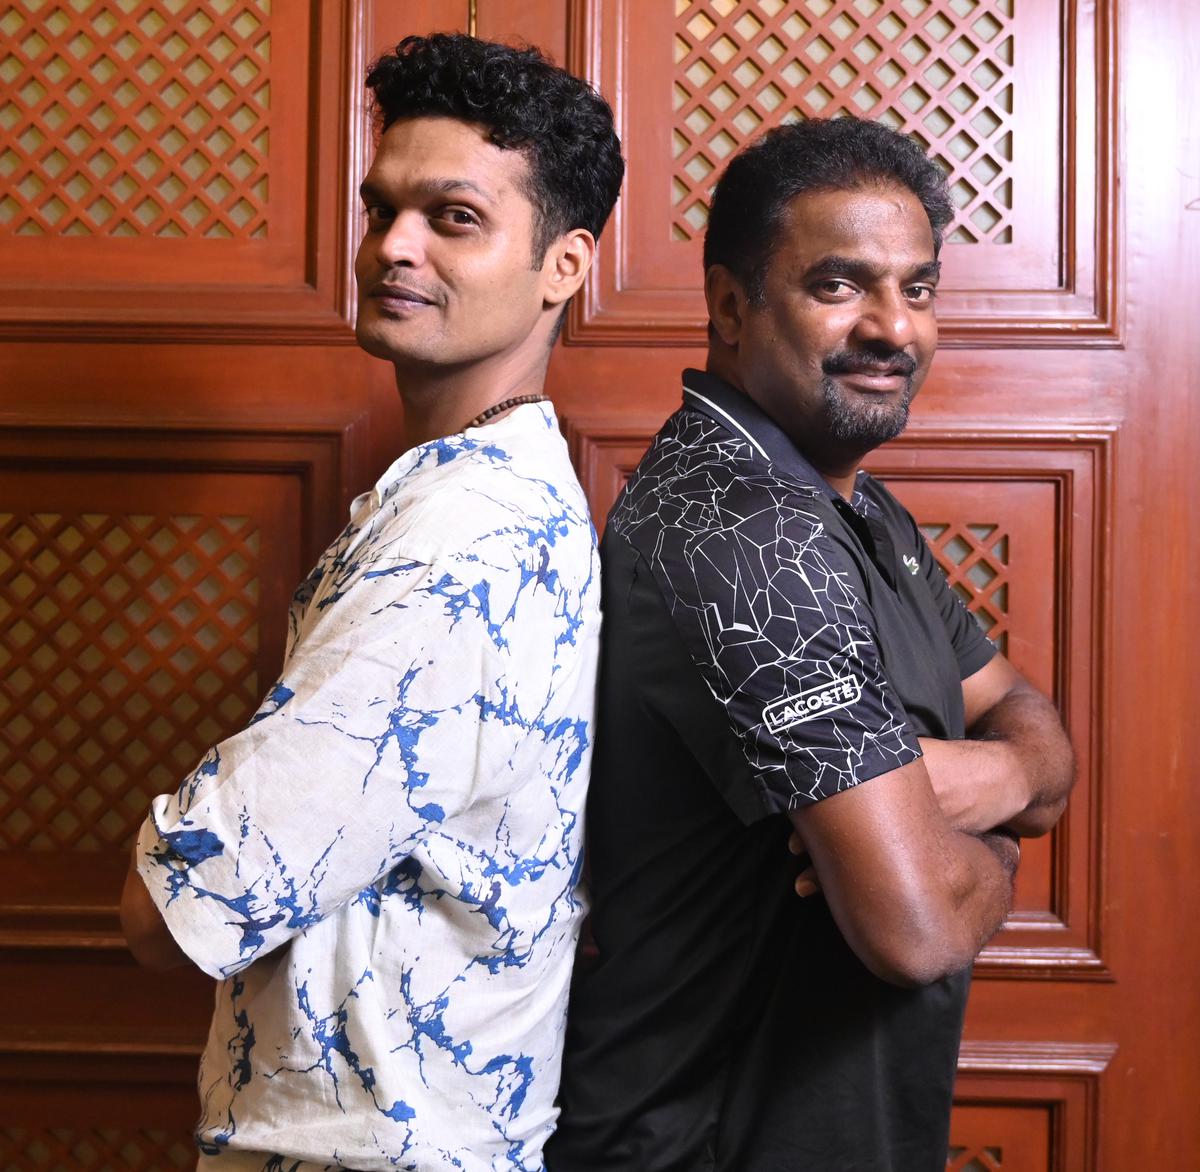 All about ‘800’: Muthiah Muralidharan and actor Madhurr Mittal on the cricketing biopic